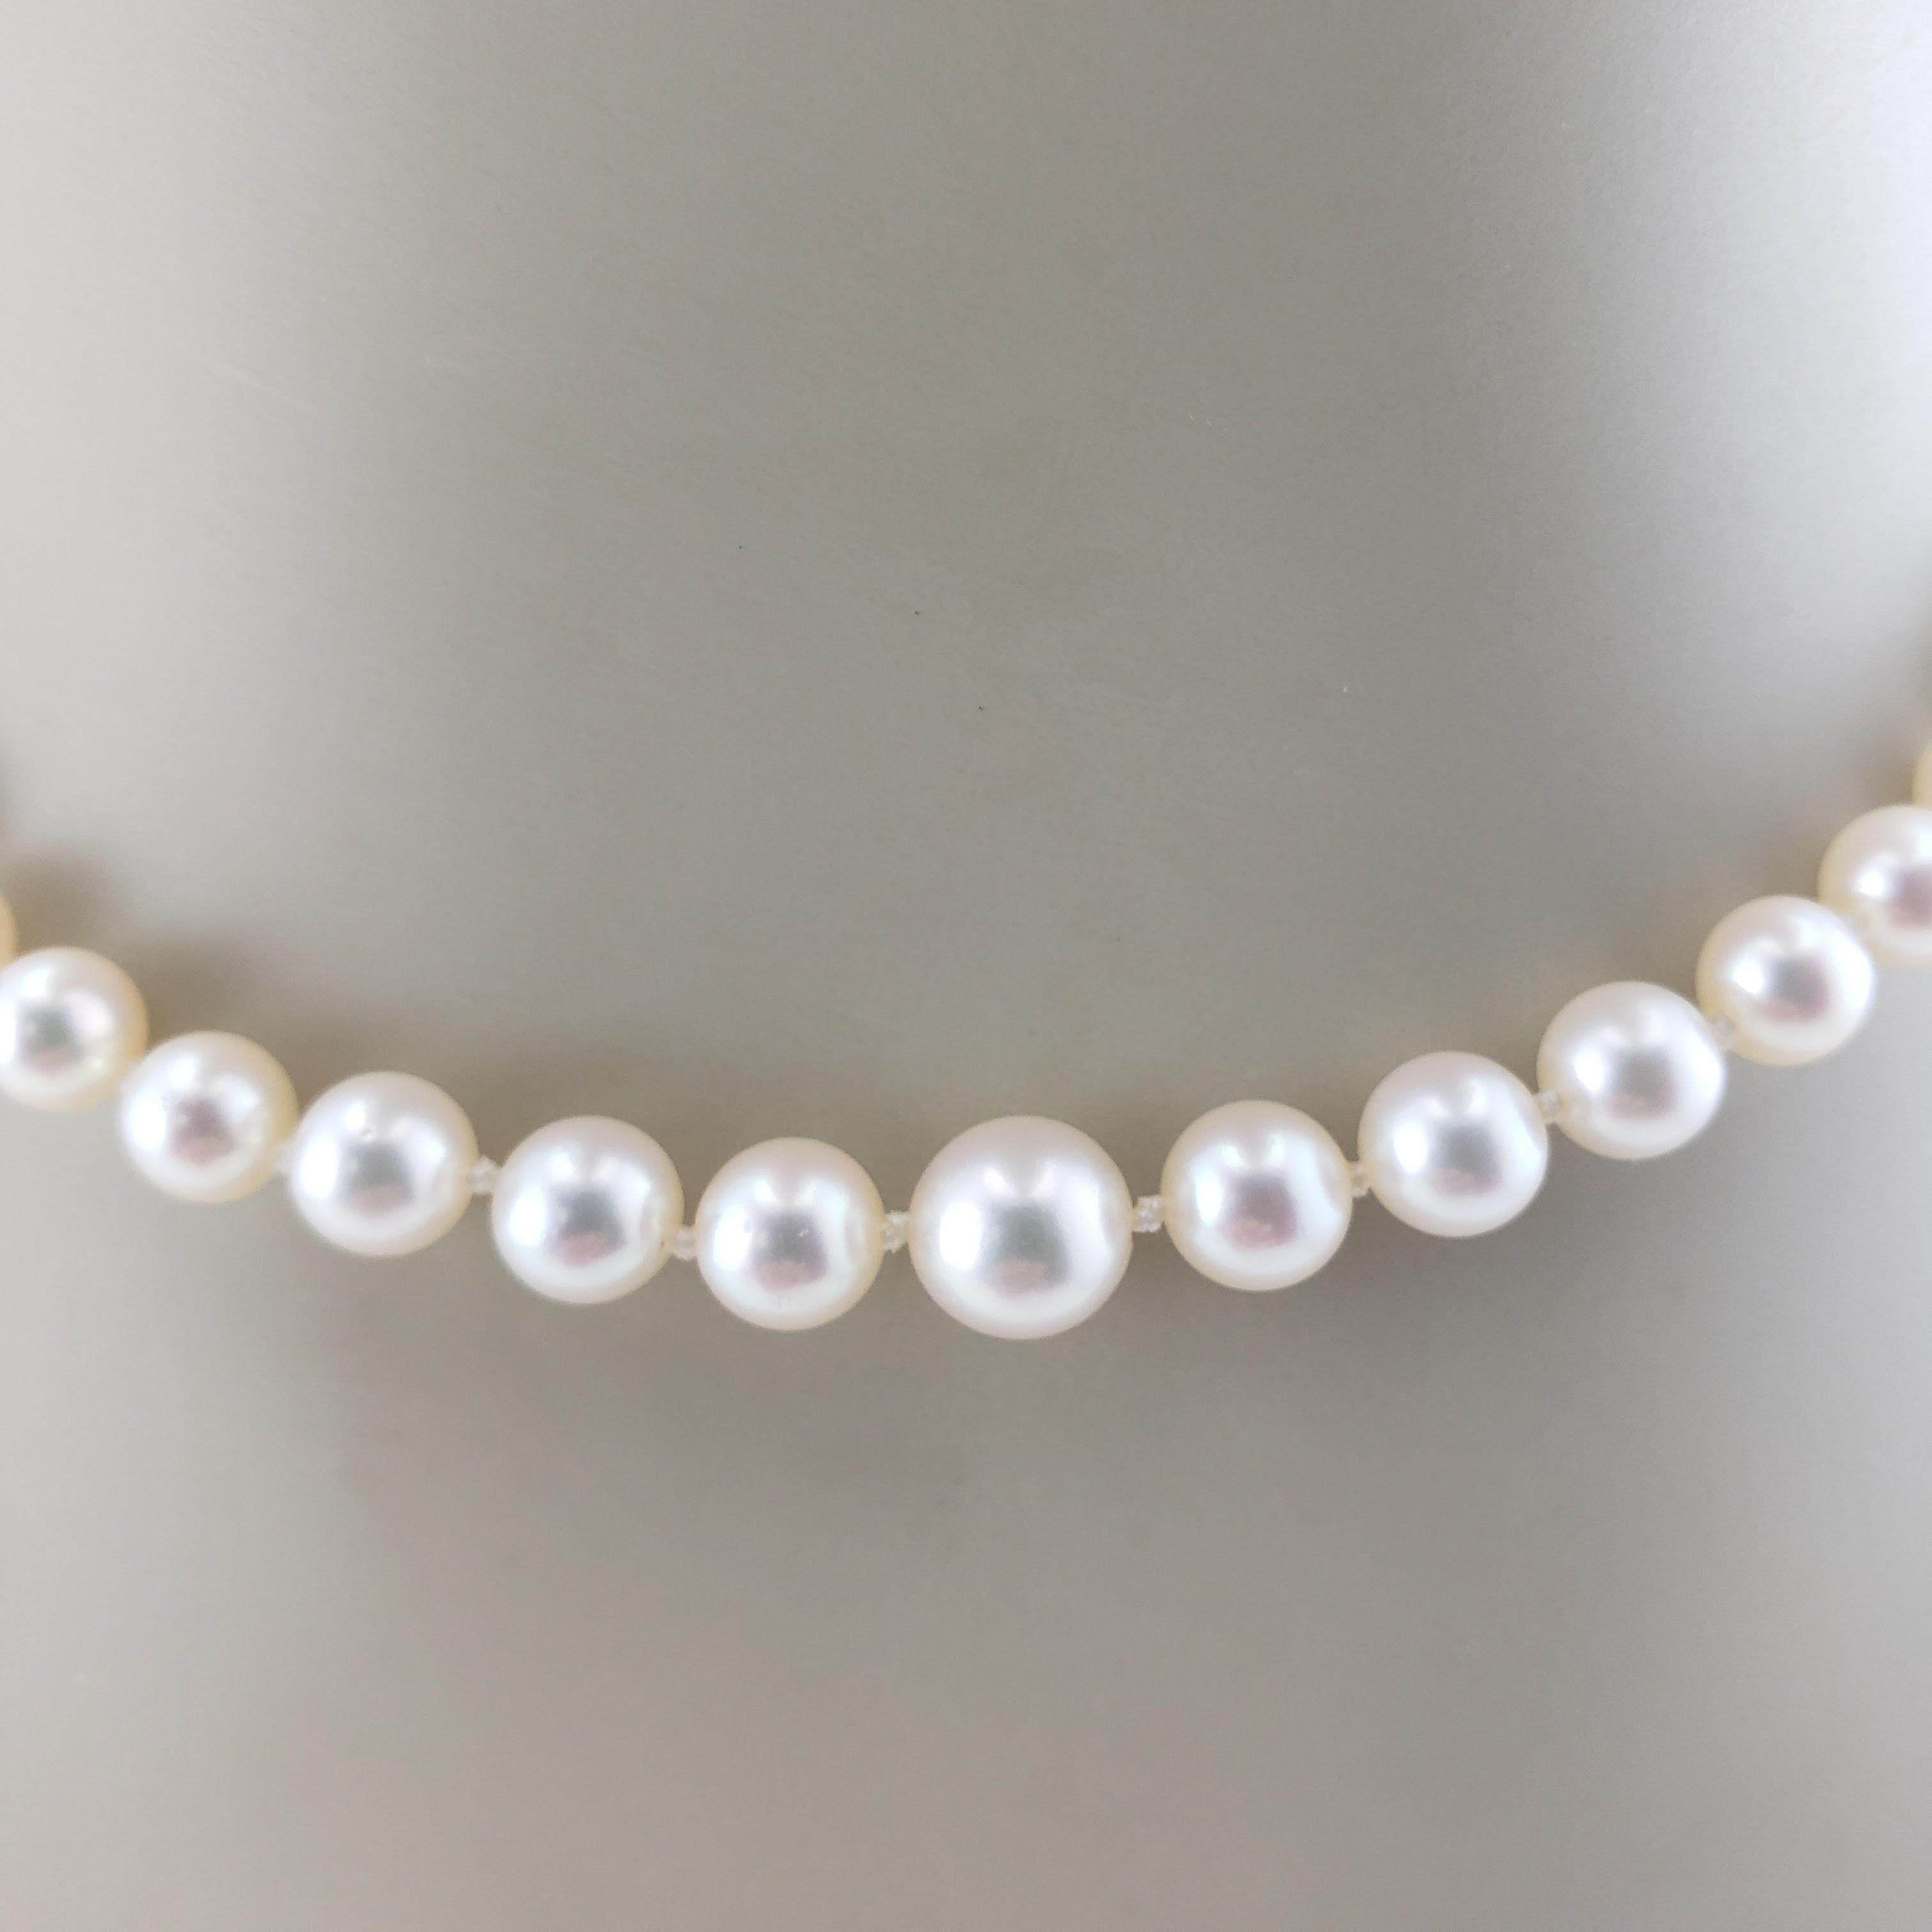 Vintage Graduated Cultured Pearl Necklace with 14 Karat White Gold Closure For Sale 2